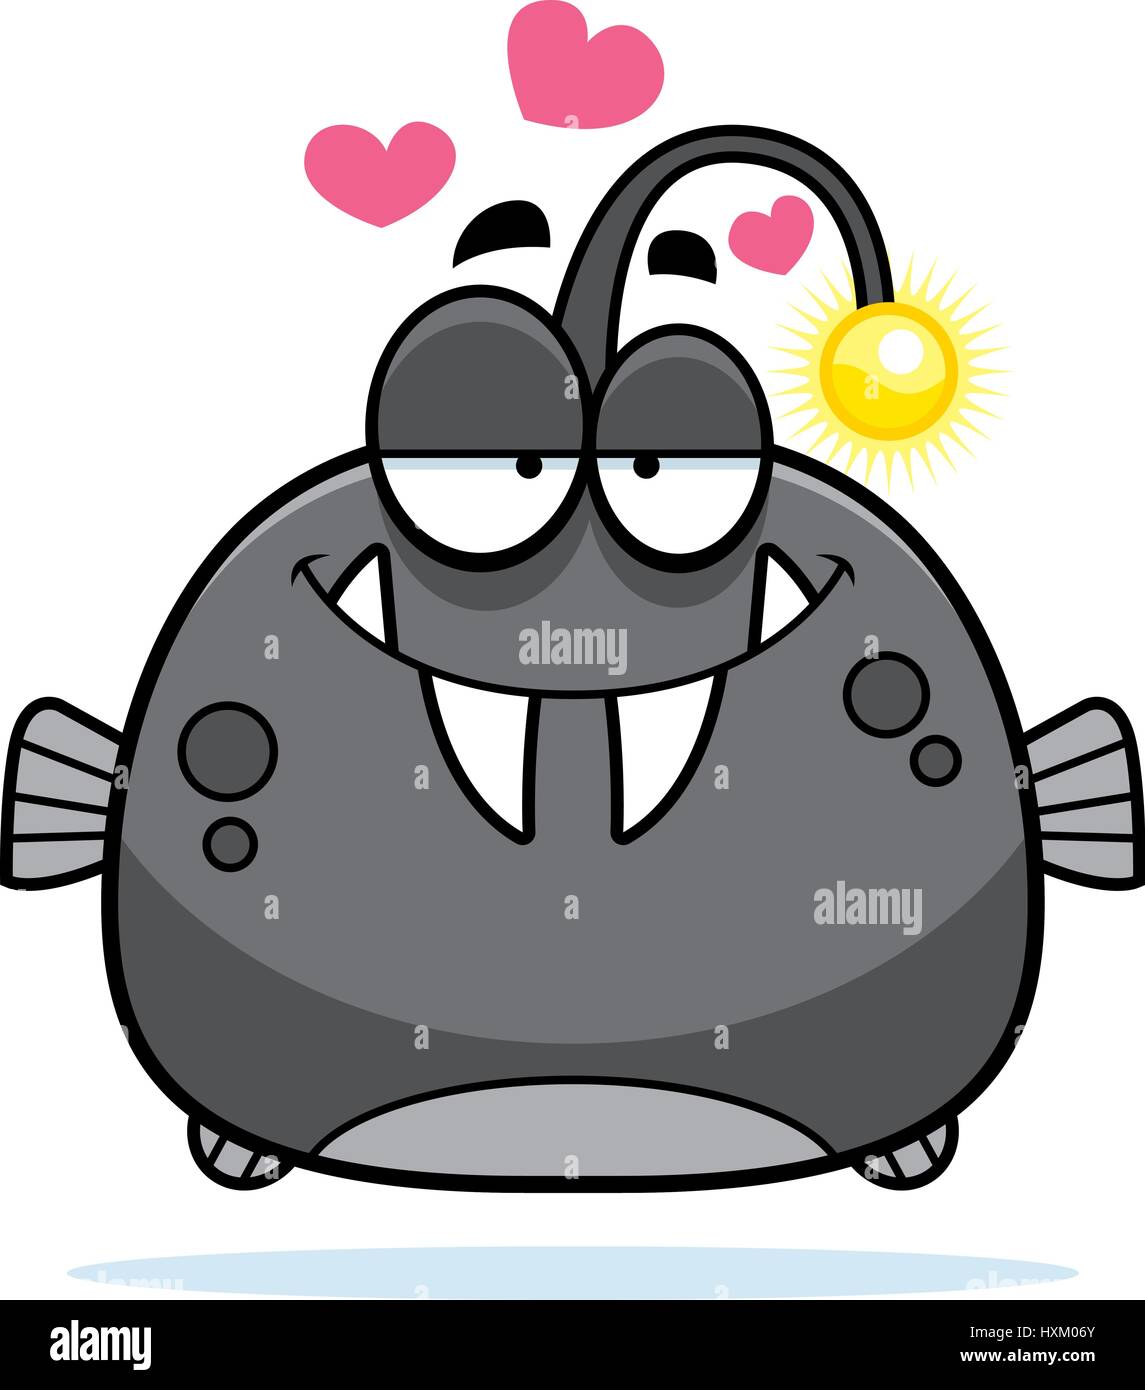 A cartoon illustration of a viperfish in love. Stock Vector